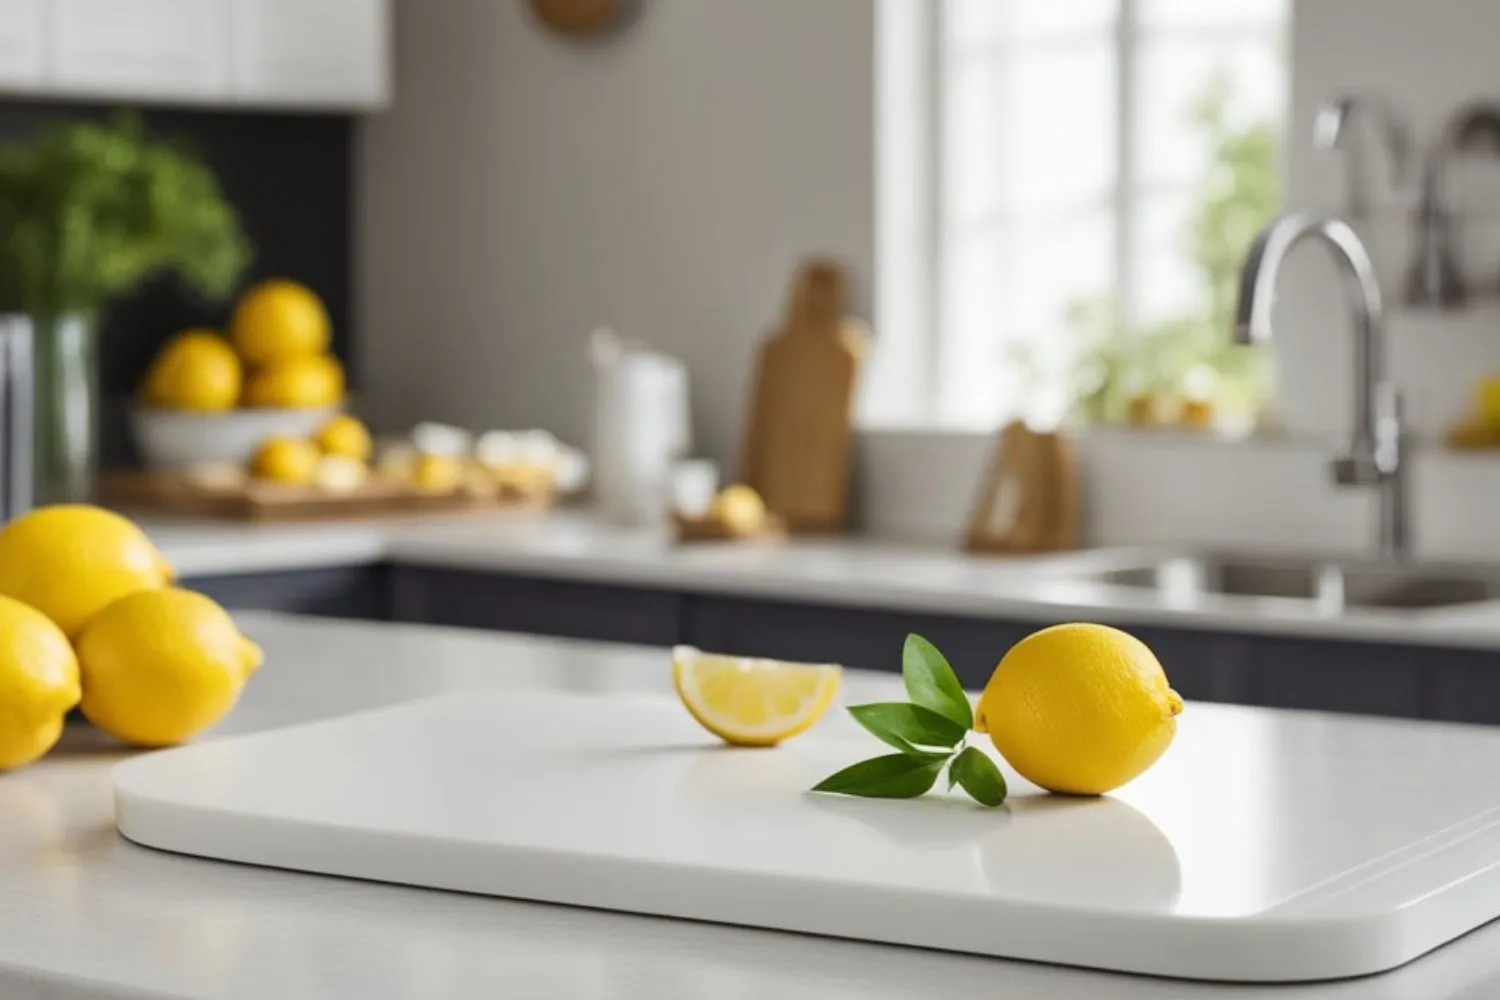 Reviving a Plastic Cutting Board with Lemon: A Simple and Eco-Friendly Technique